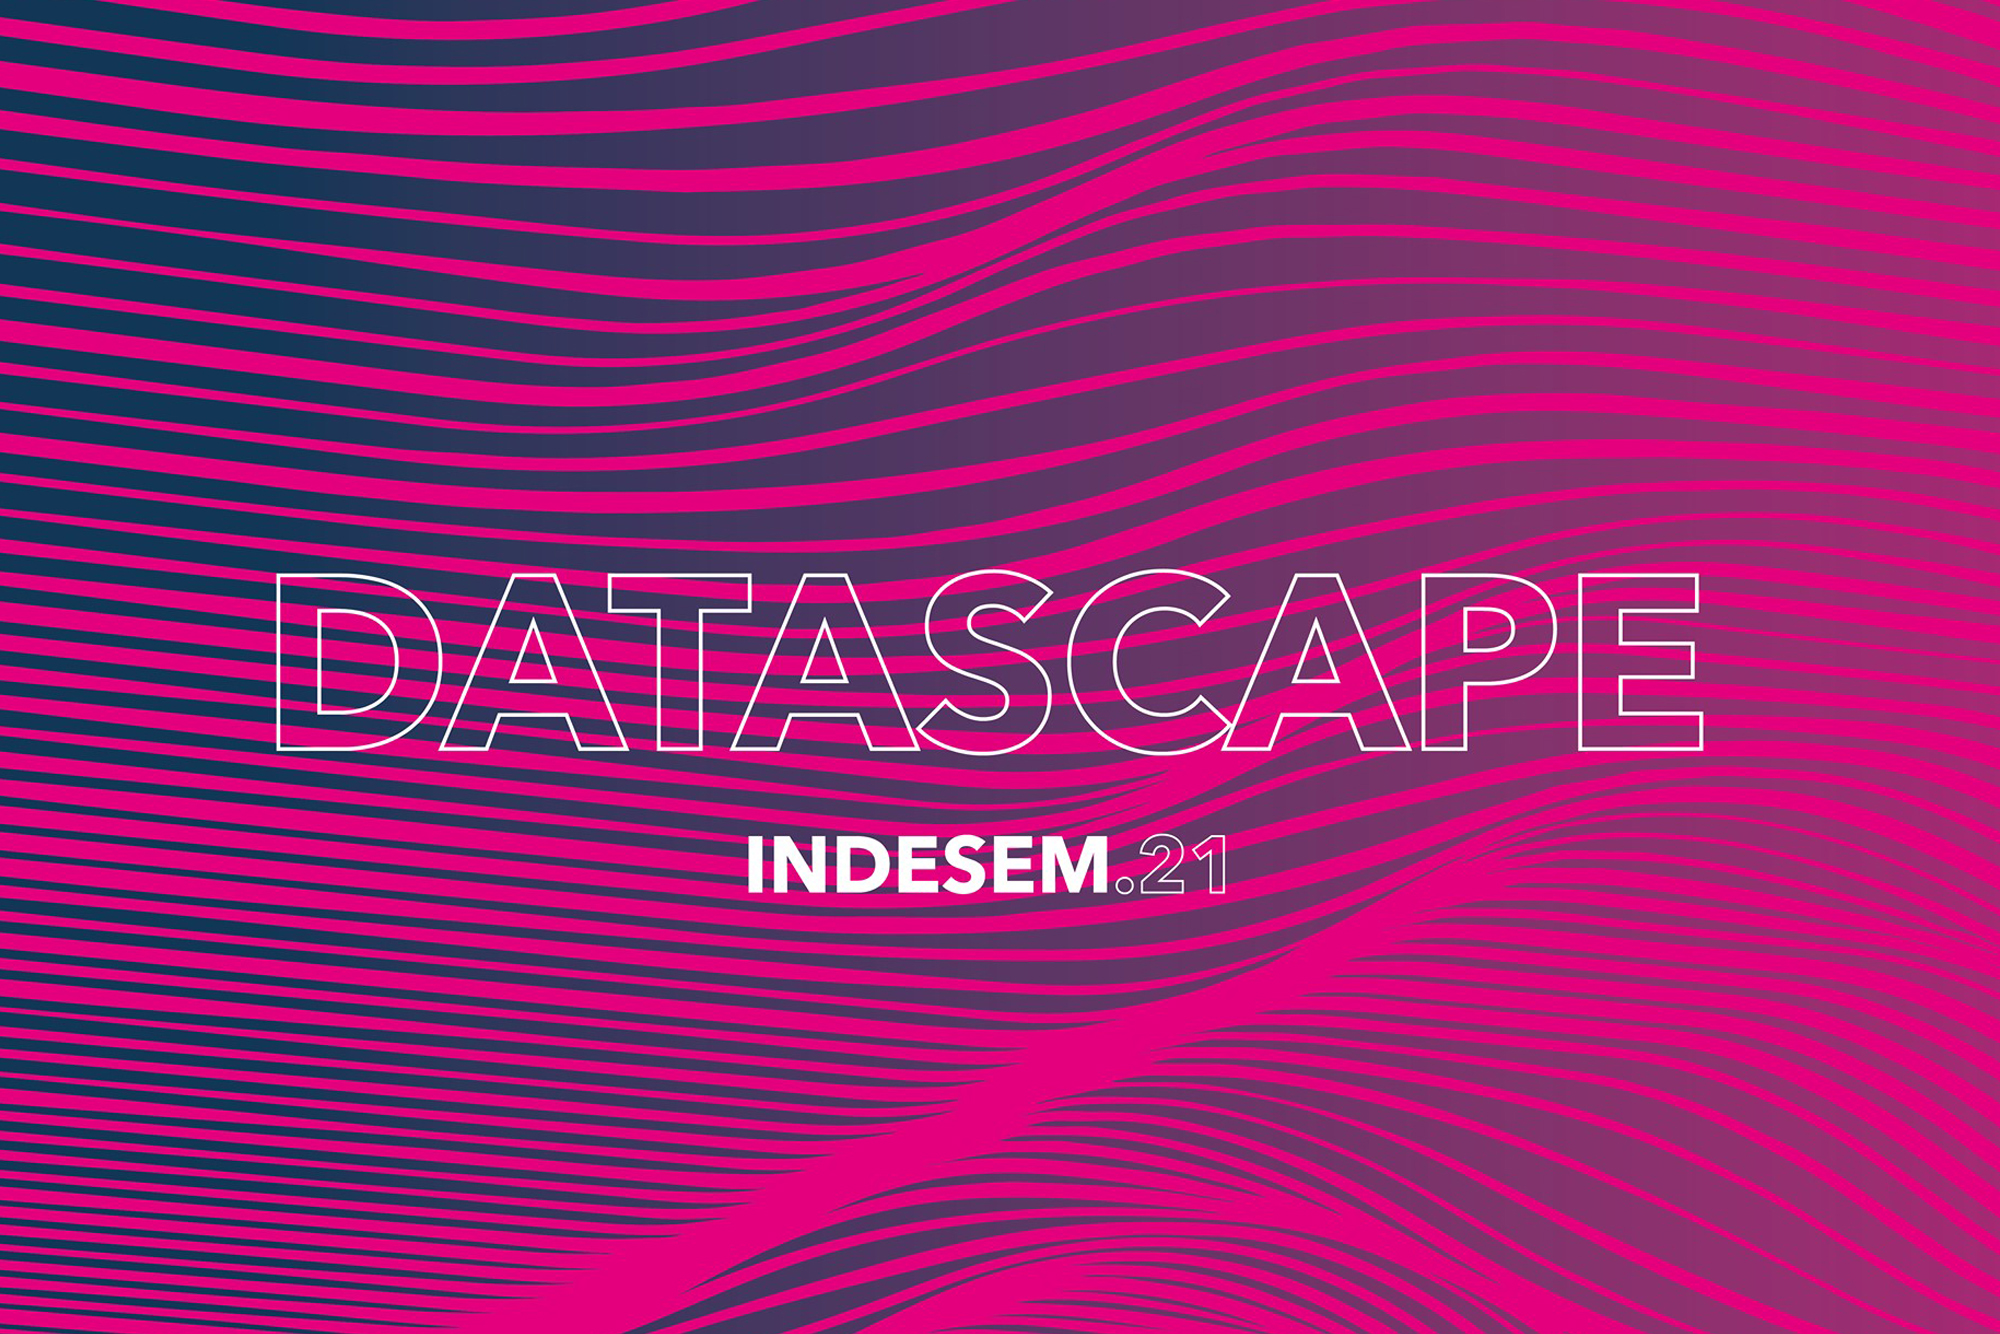 Datascapes INDESIM 2021